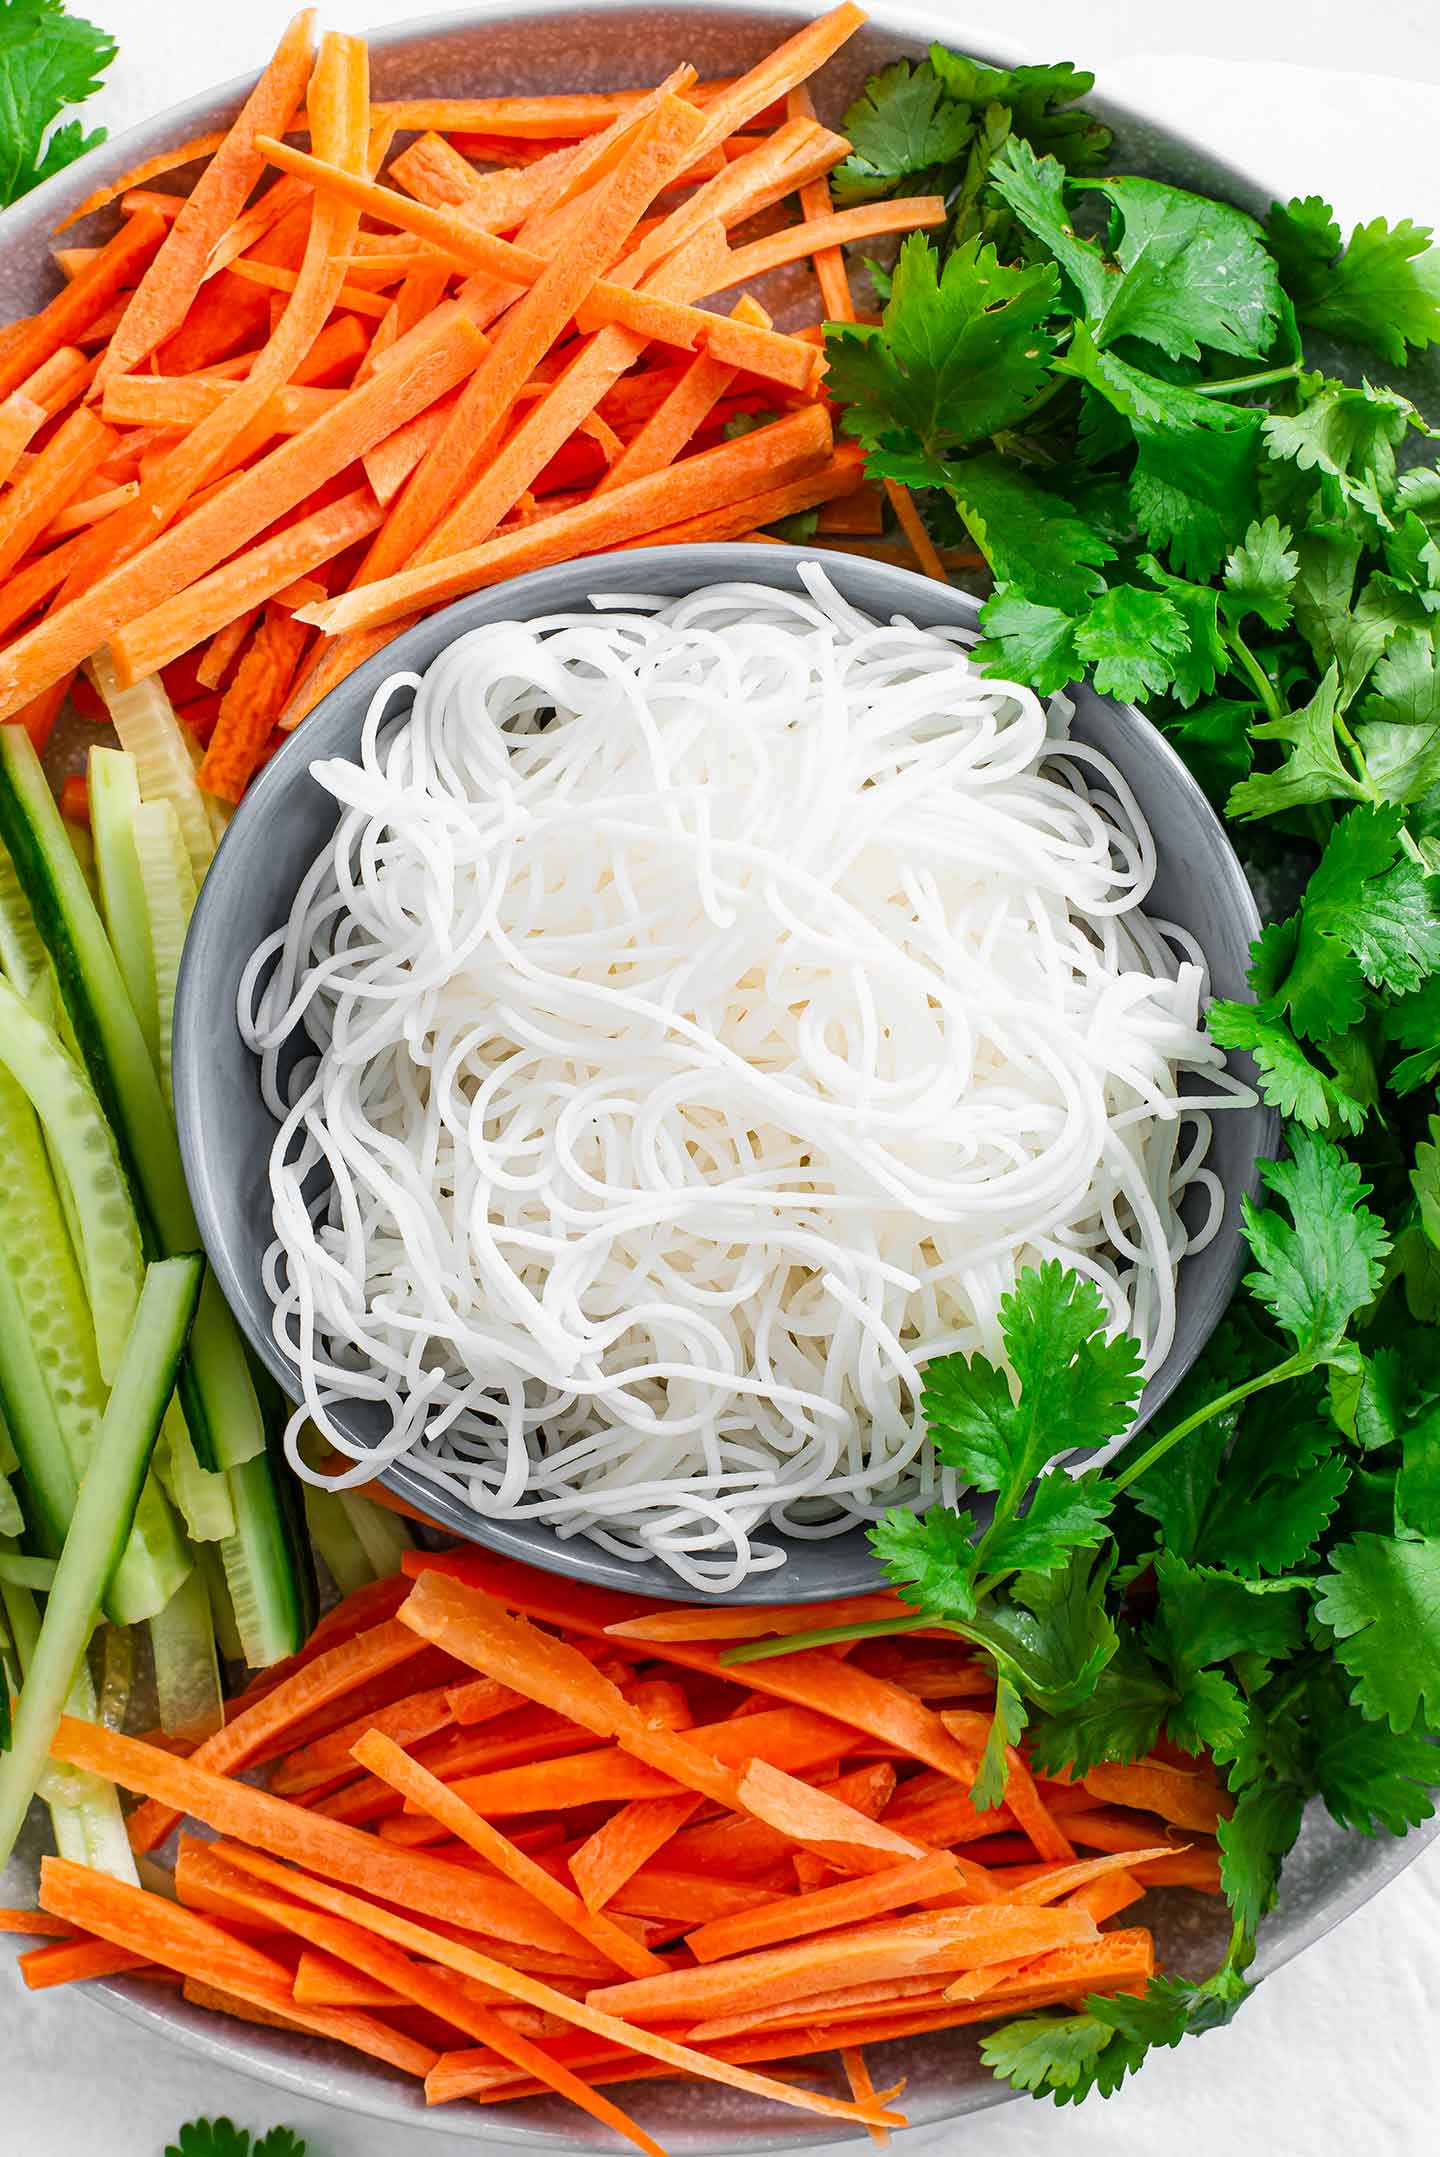 Top down view of ingredients for fresh spring rolls. Rice vermicelli noodles, cilantro, sliced carrots, and sliced cucumbers fill a plate.